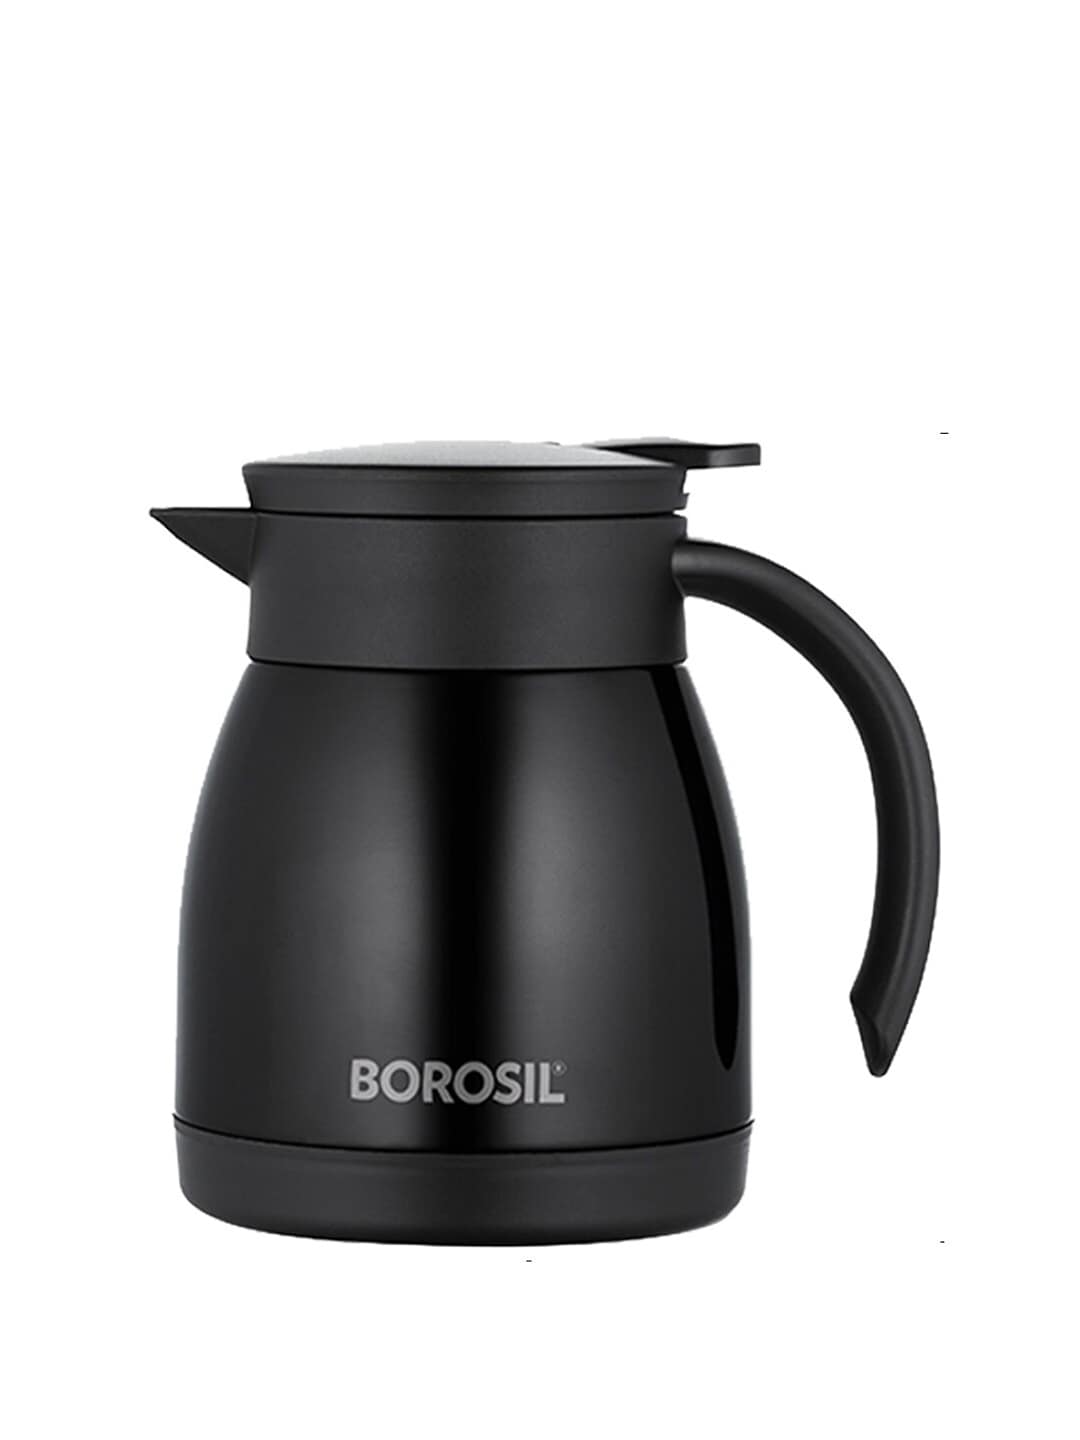 BOROSIL Black Solid Stainless Steel Glossy Kettle Price in India